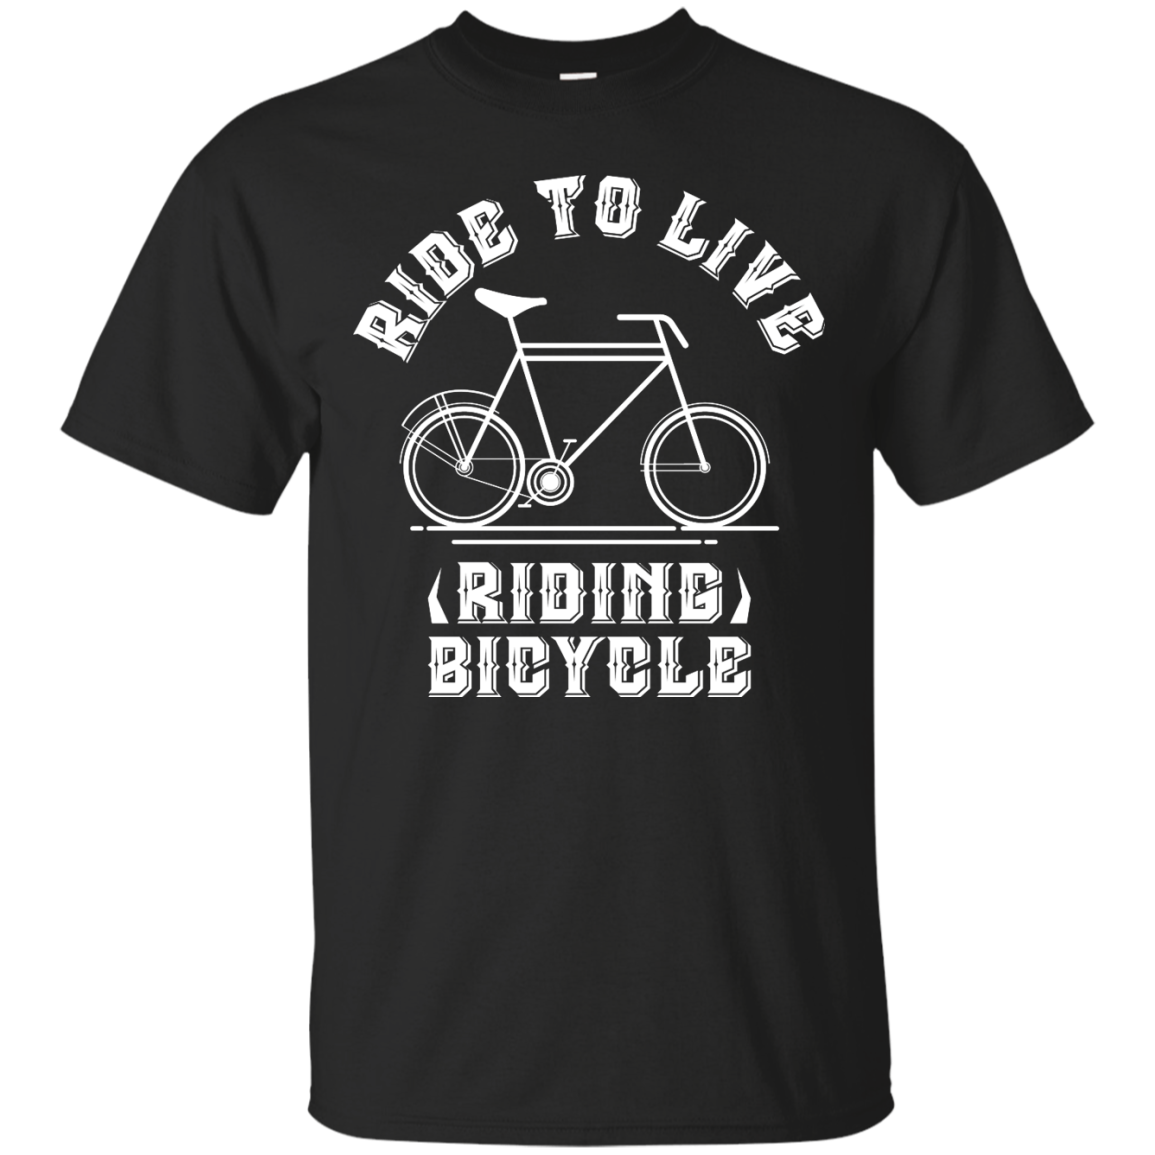 Ride To Live Riding Bicycle T-shirt